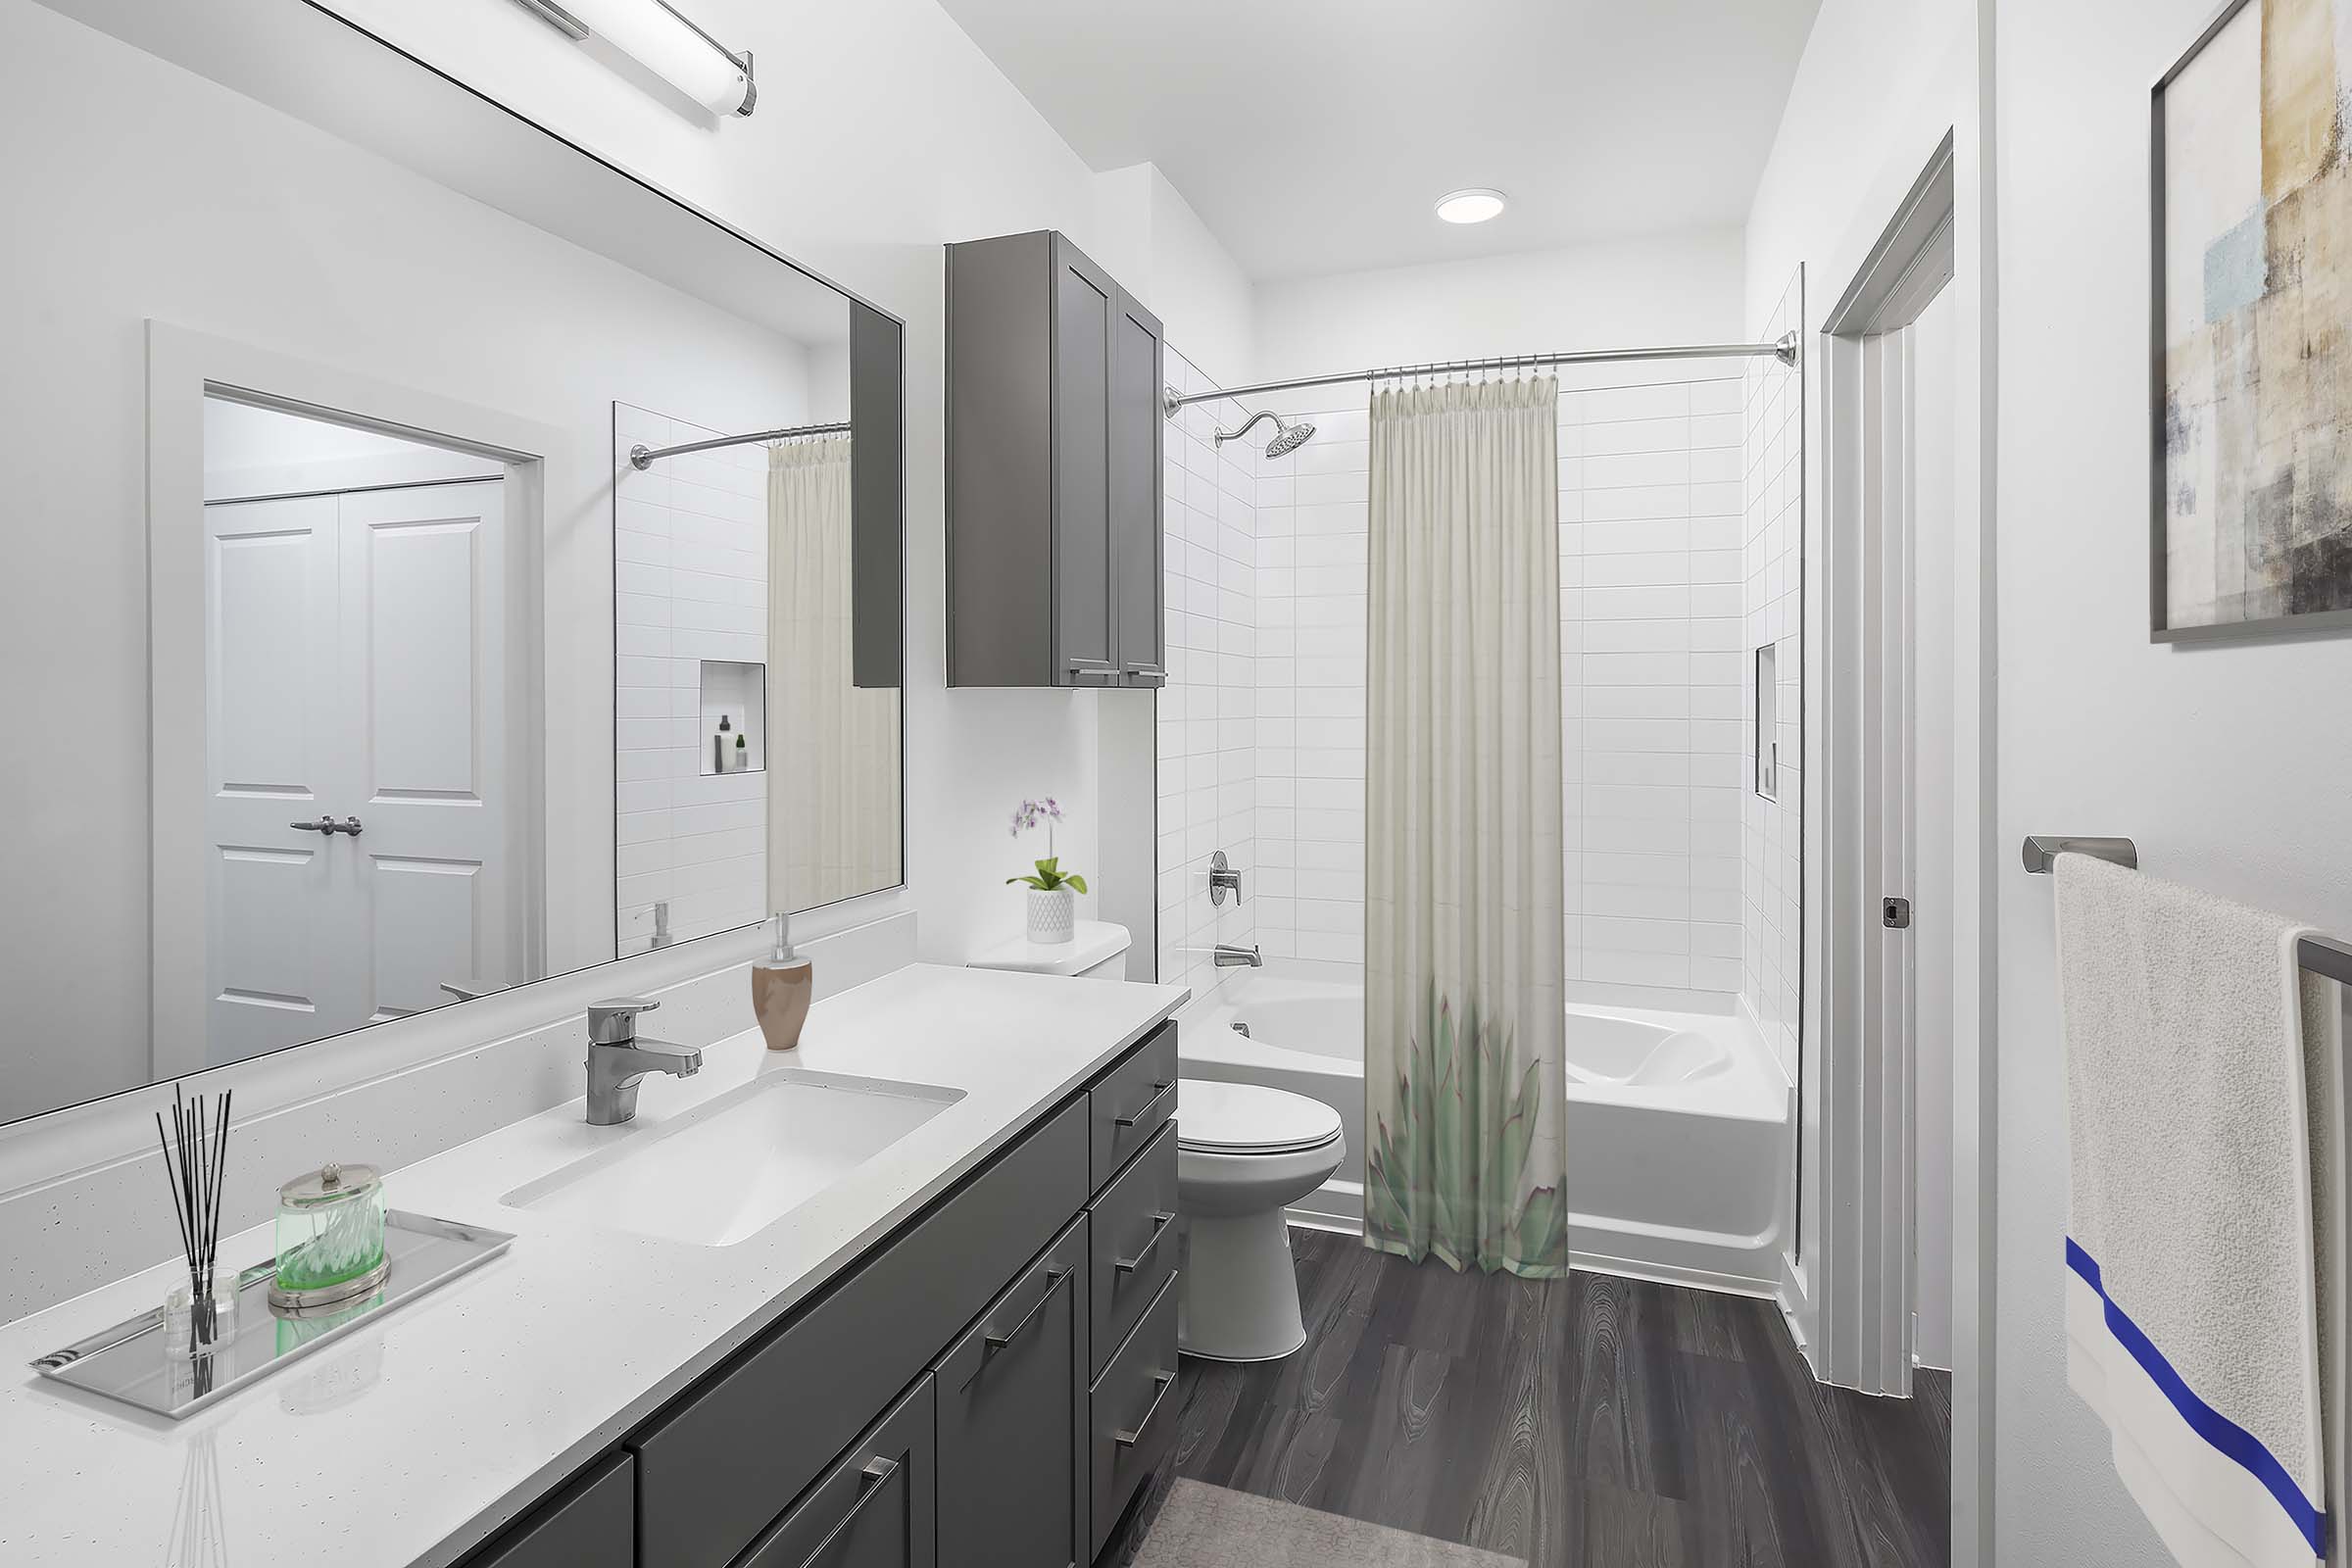 Camden Tempe West Apartments Tempe Arizona contemporary bathroom with gray cabinets, white shaker cabinets wood-like flooring and plenty of storage and curved shower rods